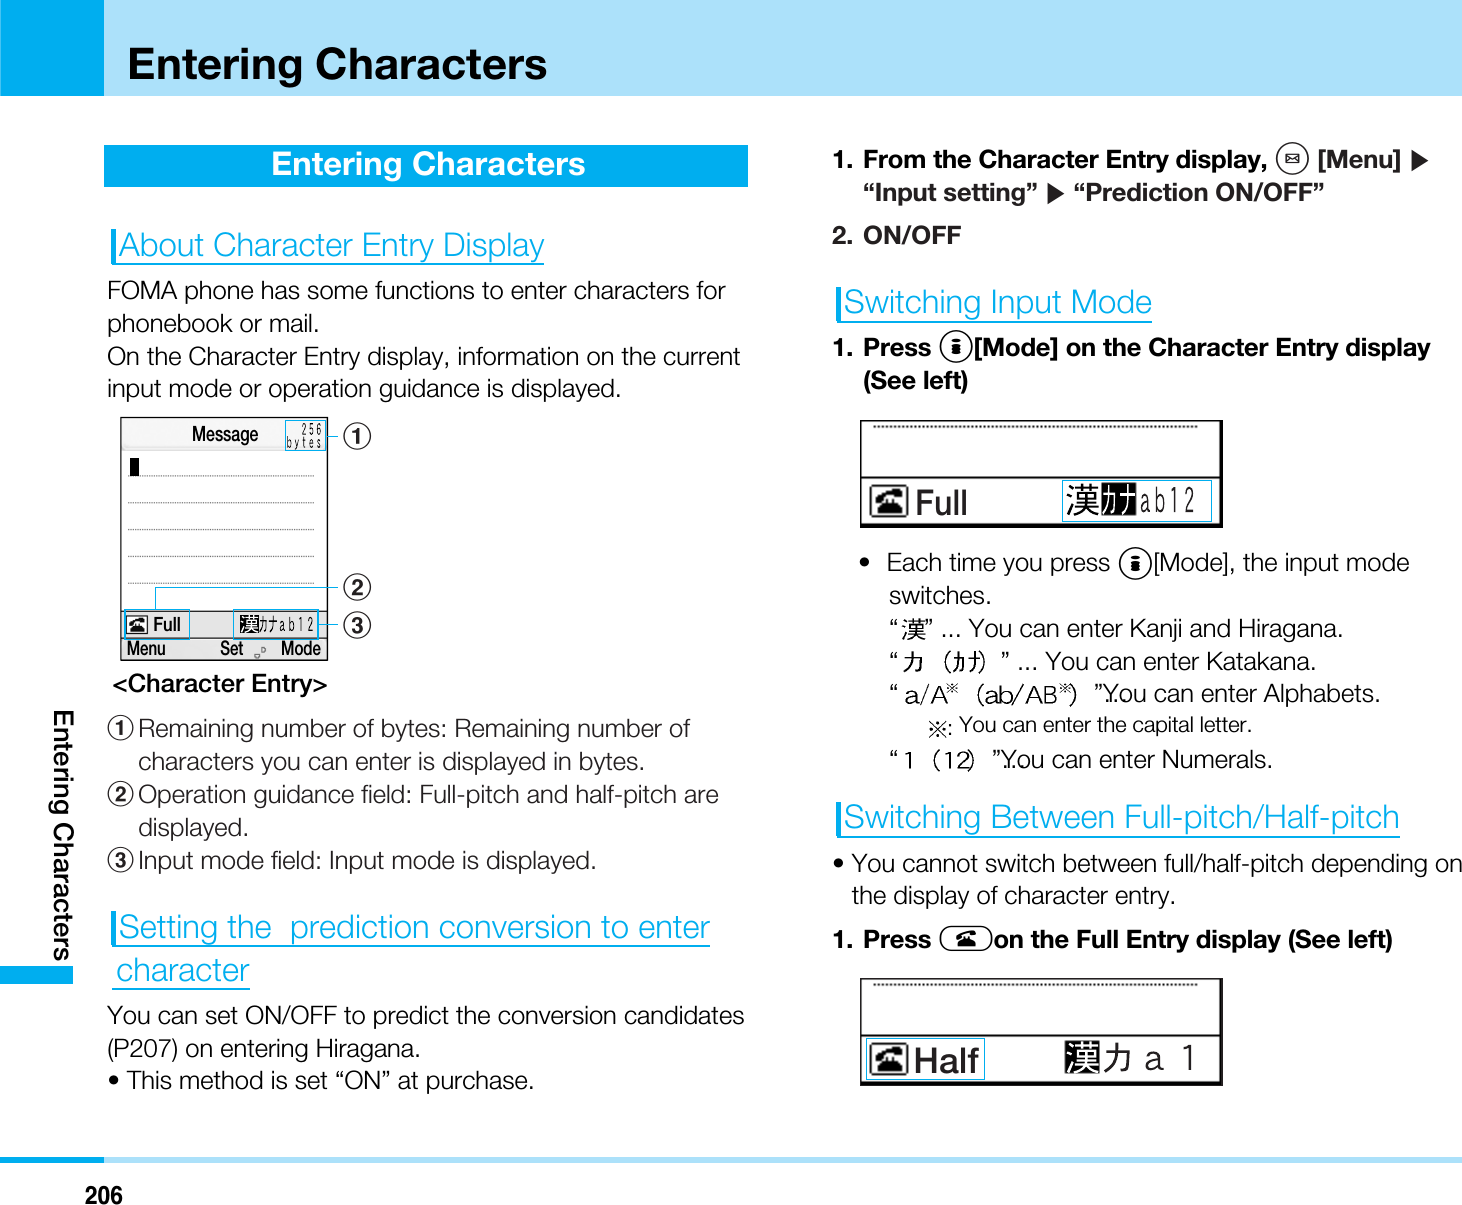 206Entering CharactersEntering CharactersEntering CharactersAbout Character Entry DisplayFOMA phone has some functions to enter characters forphonebook or mail.On the Character Entry display, information on the currentinput mode or operation guidance is displayed.&lt;Character Entry&gt;1Remaining number of bytes: Remaining number ofcharacters you can enter is displayed in bytes.2Operation guidance field: Full-pitch and half-pitch aredisplayed.3Input mode field: Input mode is displayed.Setting the  prediction conversion to entercharacterYou can set ON/OFF to predict the conversion candidates(P207) on entering Hiragana.• This method is set “ON” at purchase.1. From the Character Entry display, M[Menu] ]“Input setting” ]“Prediction ON/OFF”2. ON/OFFSwitching Input Mode1. Press I[Mode] on the Character Entry display(See left)• Each time you press I[Mode], the input modeswitches.“” ... You can enter Kanji and Hiragana.“” ... You can enter Katakana.“”…You can enter Alphabets.:You can enter the capital letter.“”…You can enter Numerals.Switching Between Full-pitch/Half-pitch• You cannot switch between full/half-pitch depending onthe display of character entry.1. Press Aon the Full Entry display (See left)HalfFull23Menu             Set         ModeMessageFull1